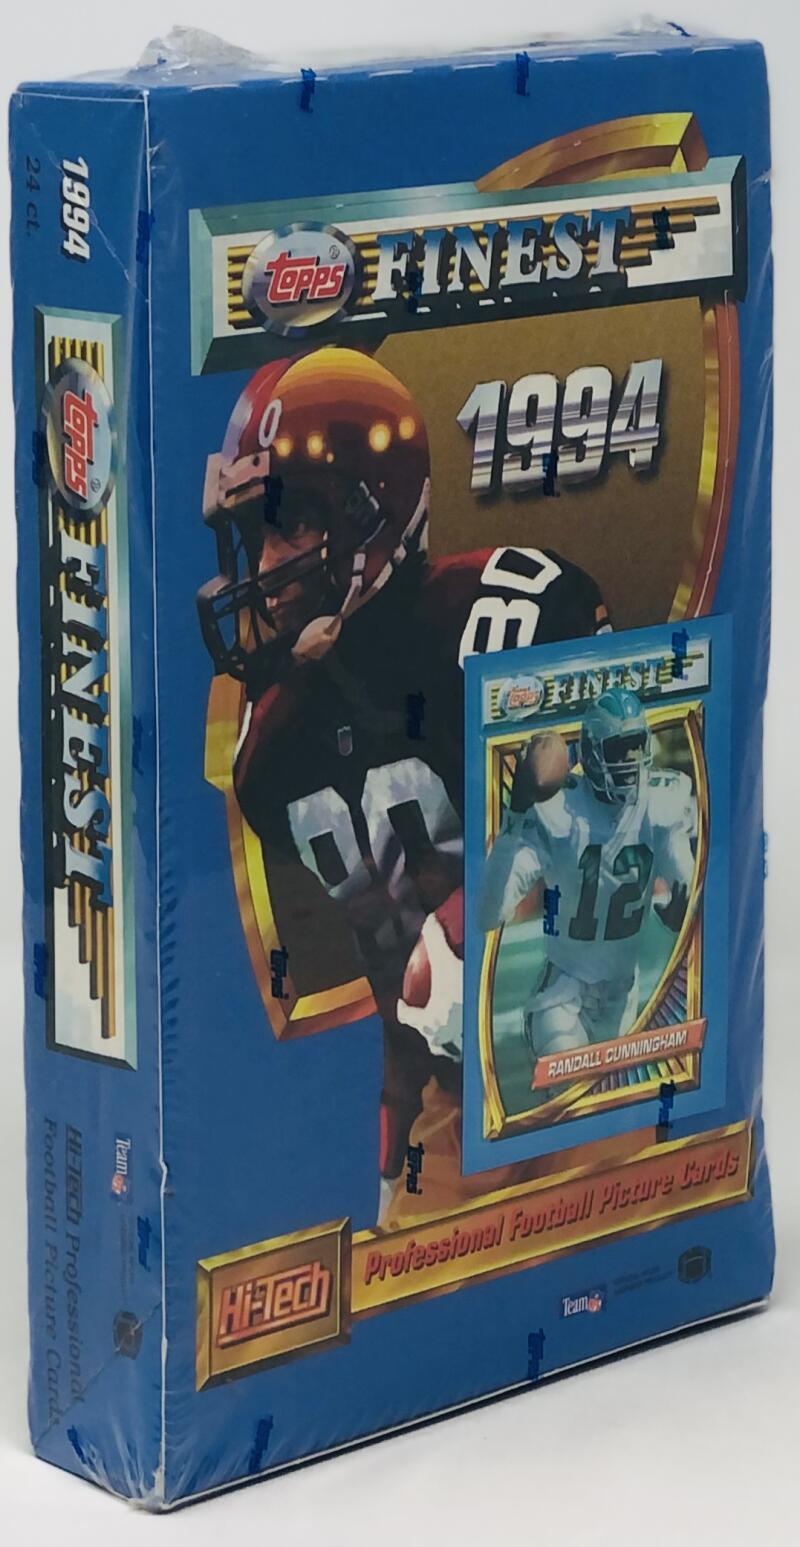 1994 Topps Finest 24ct Football Box Image 1